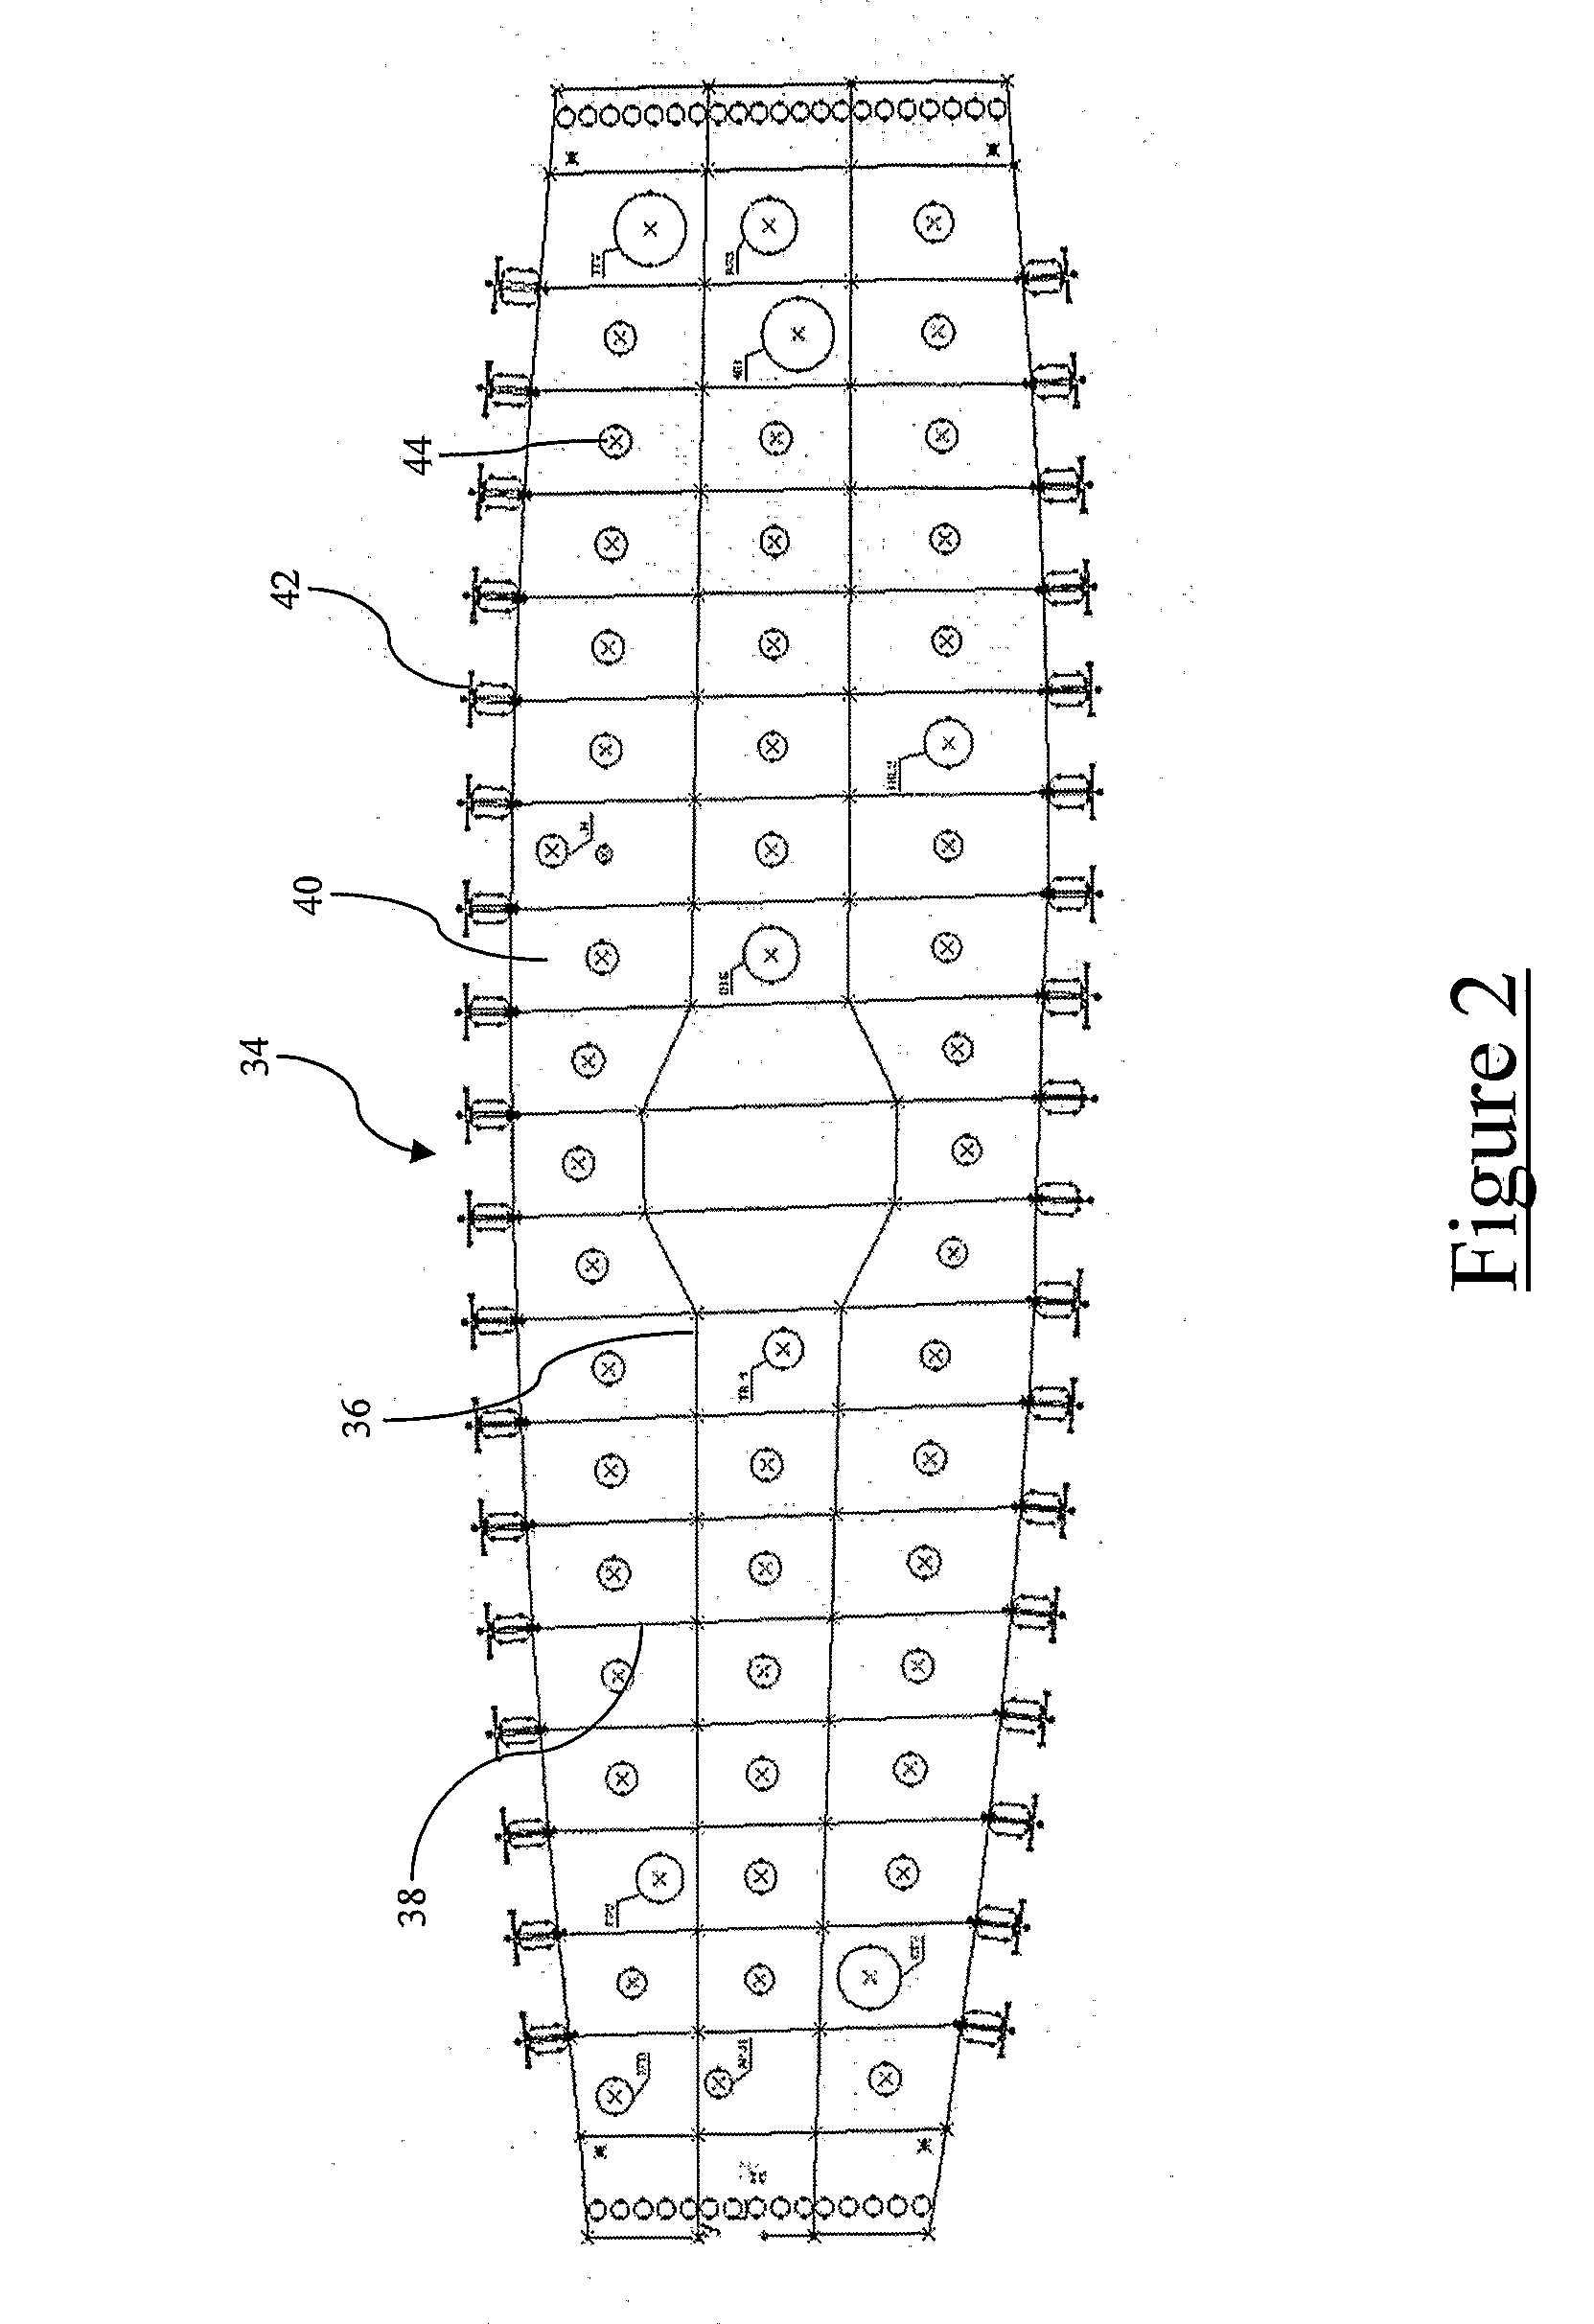 Machining Template Based Computer-Aided Design and Manufacture Of An Aerospace Component